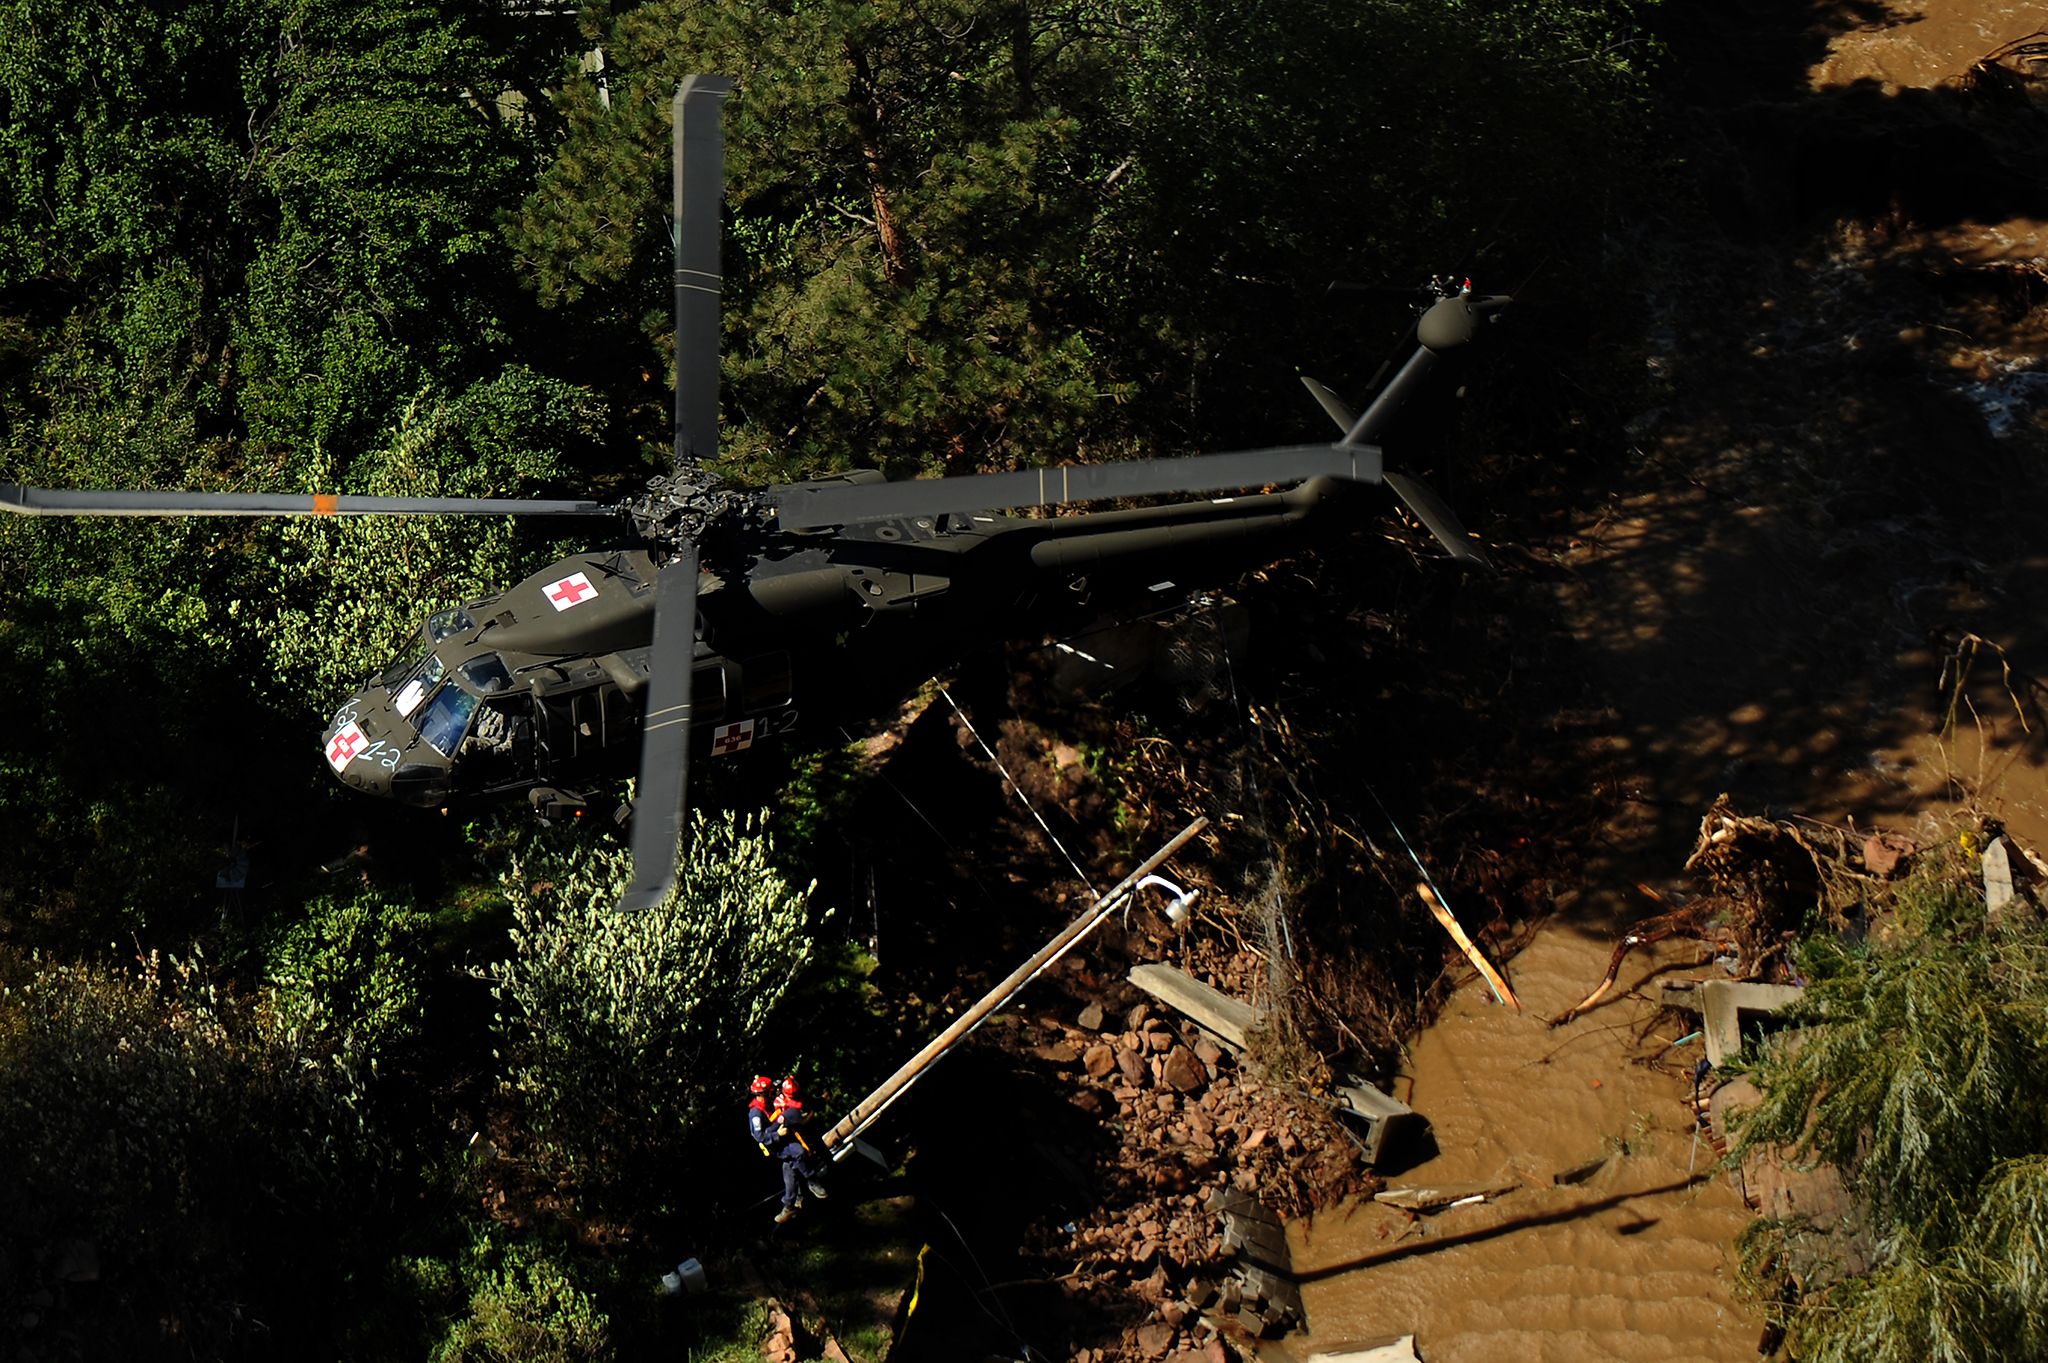 fema personal are hoisted into a uh 60 black hawk by us army soldiers during flooding in boulder colorado